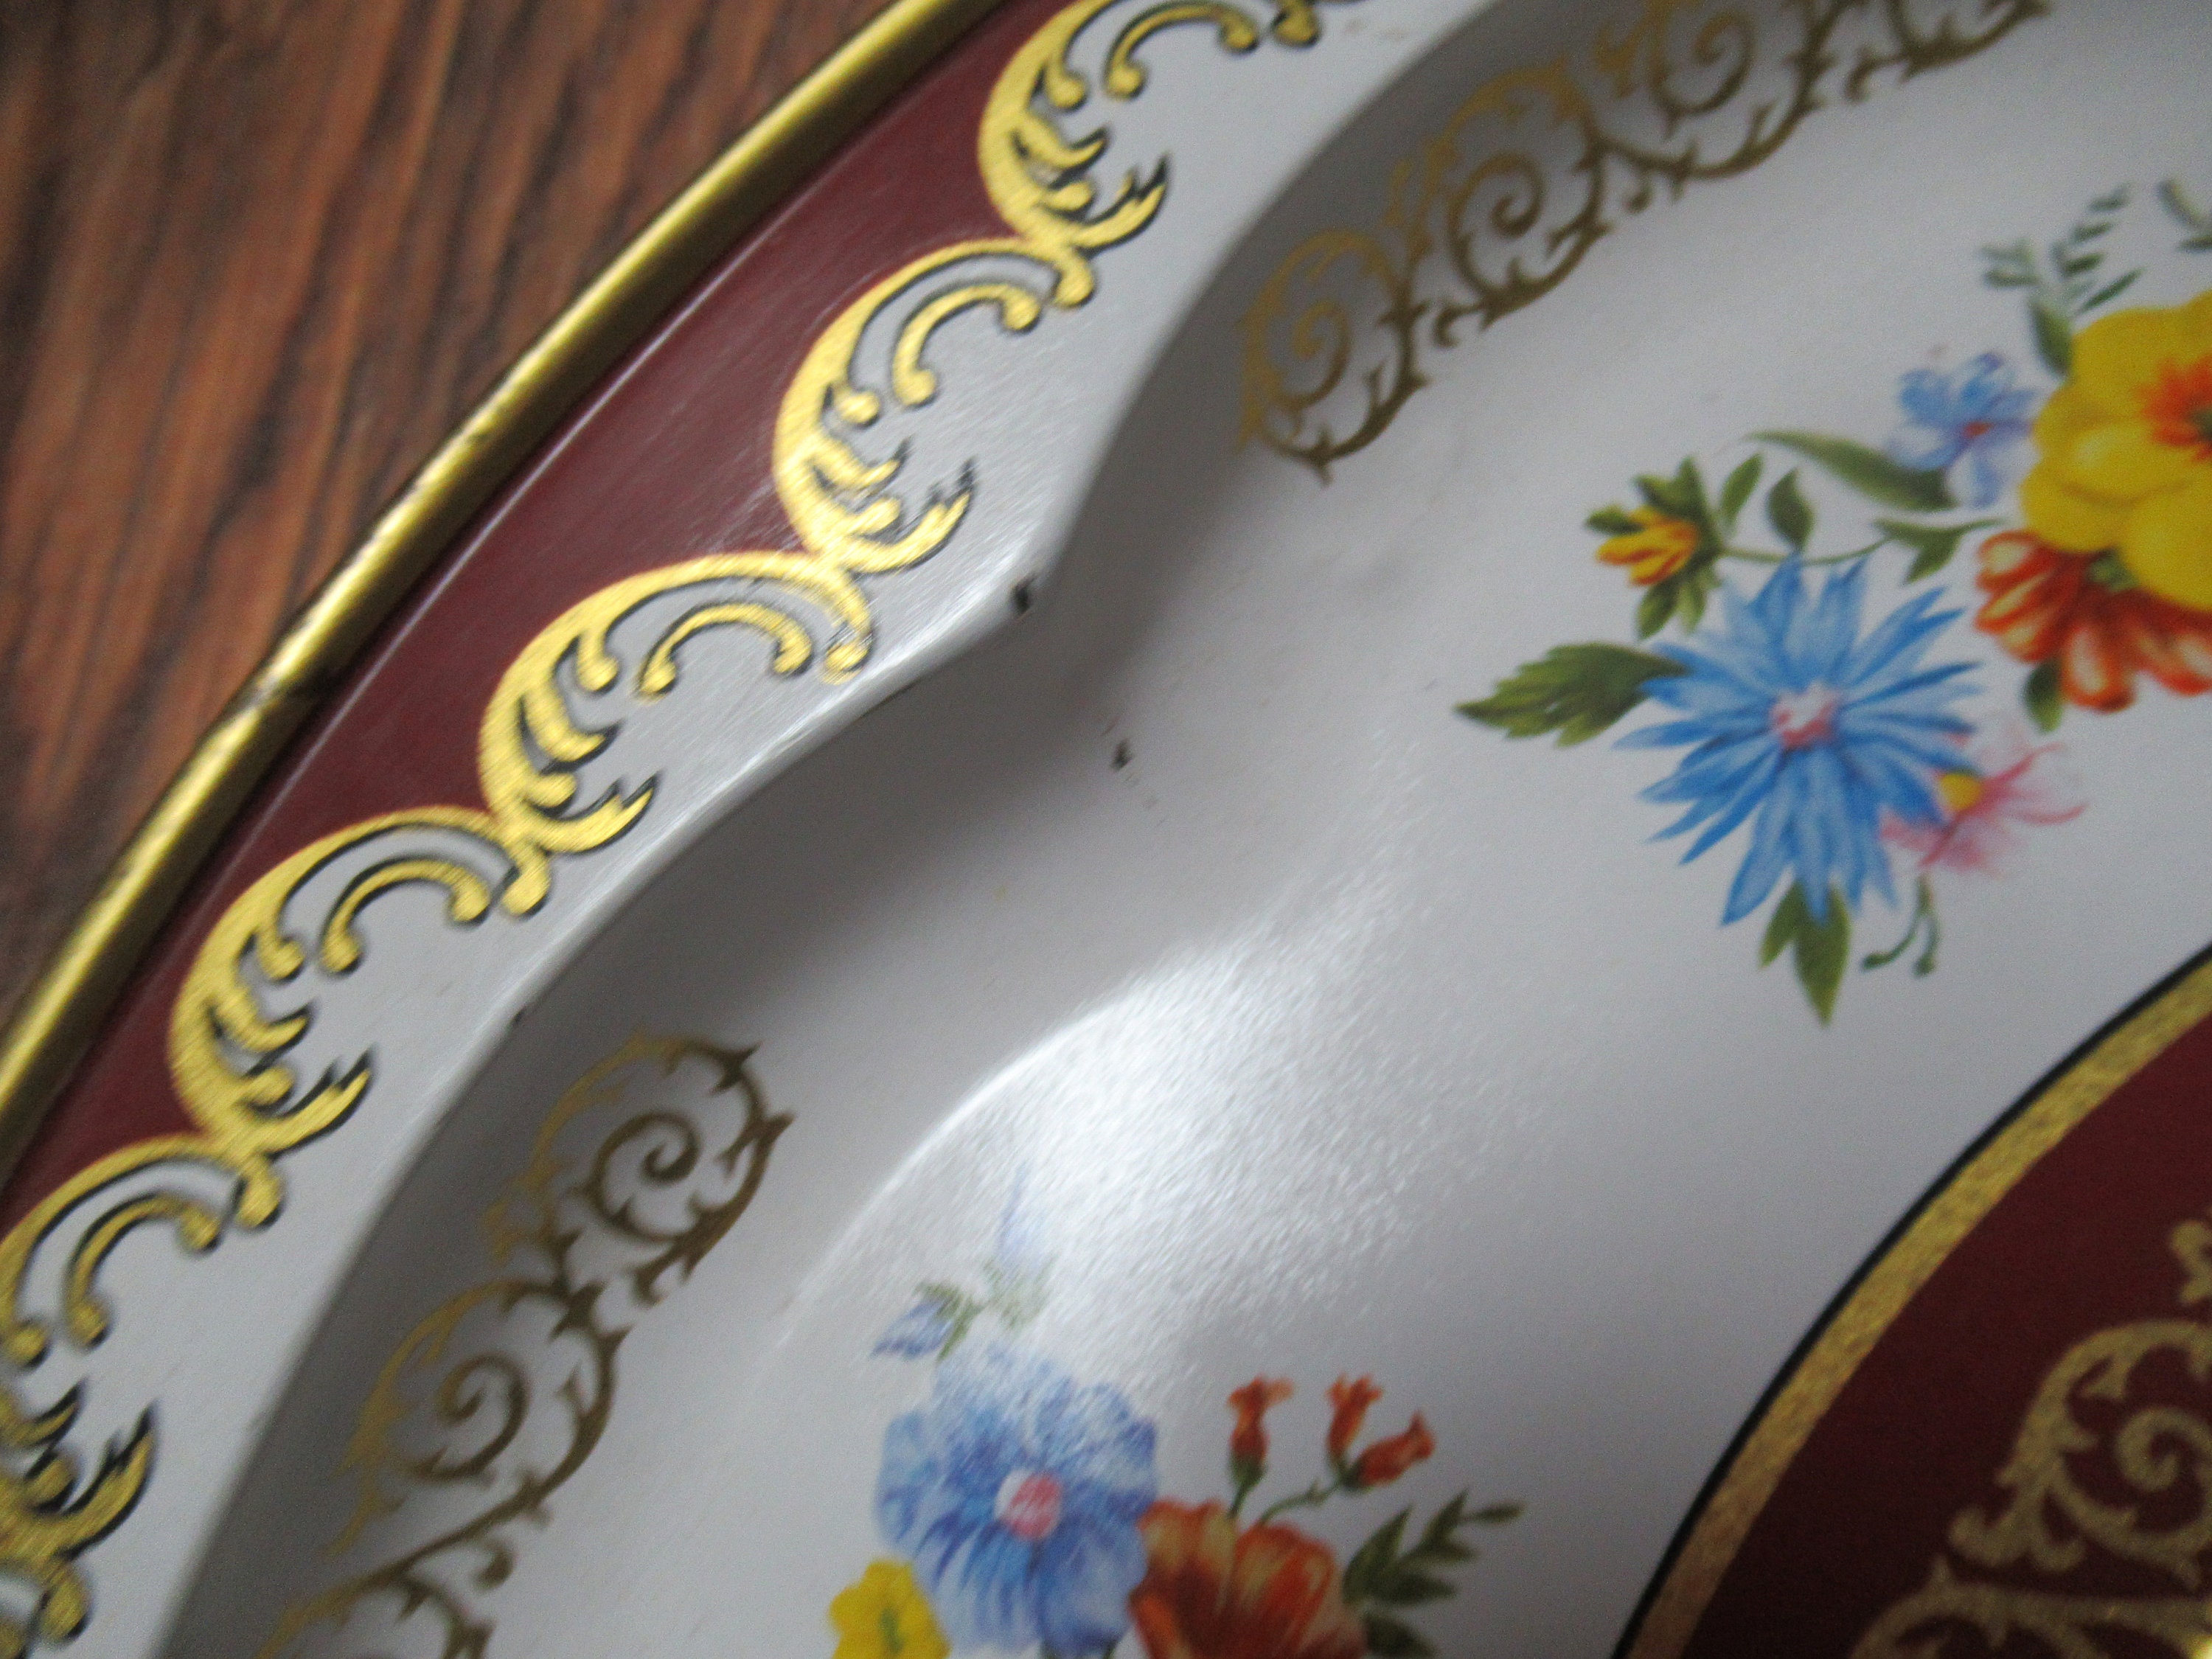 Vintage Daher Decorated Ware Metal Tray - Chinoiserie – Pink Porch